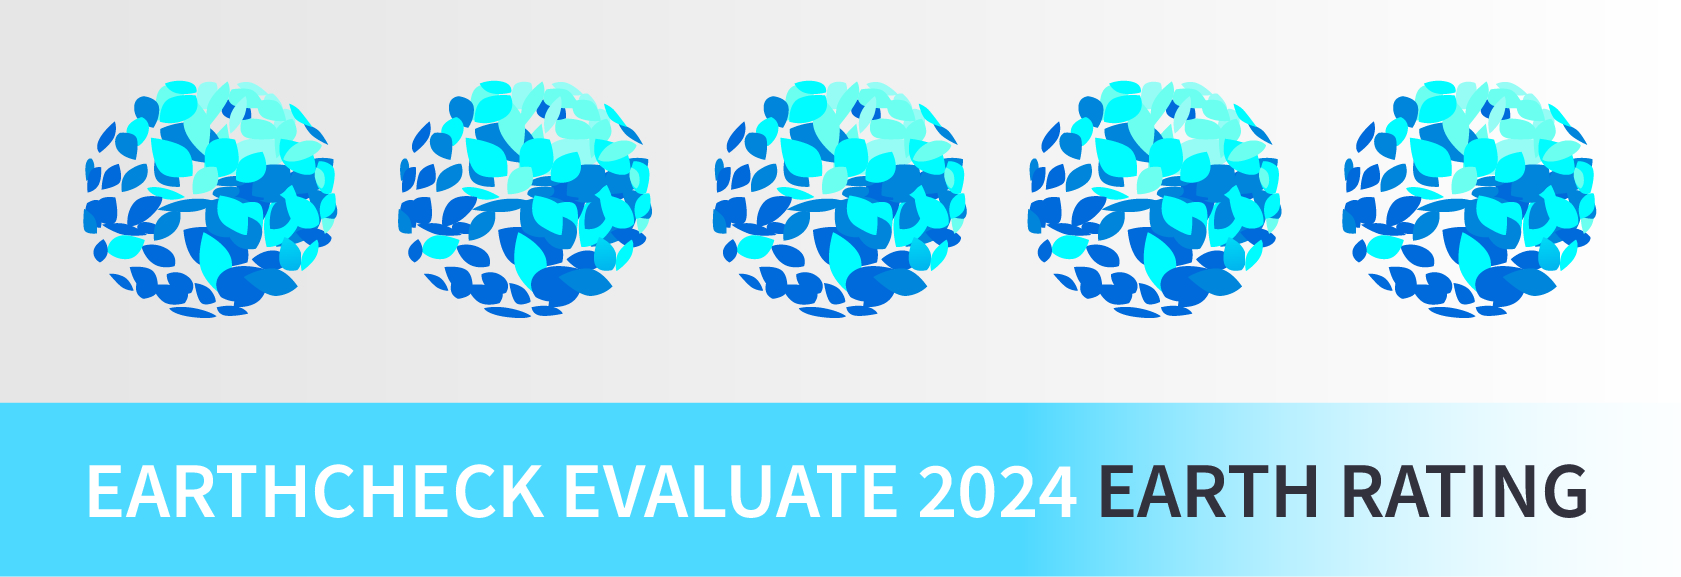 EarthCheck Evaluate 2024 - Earth Rating